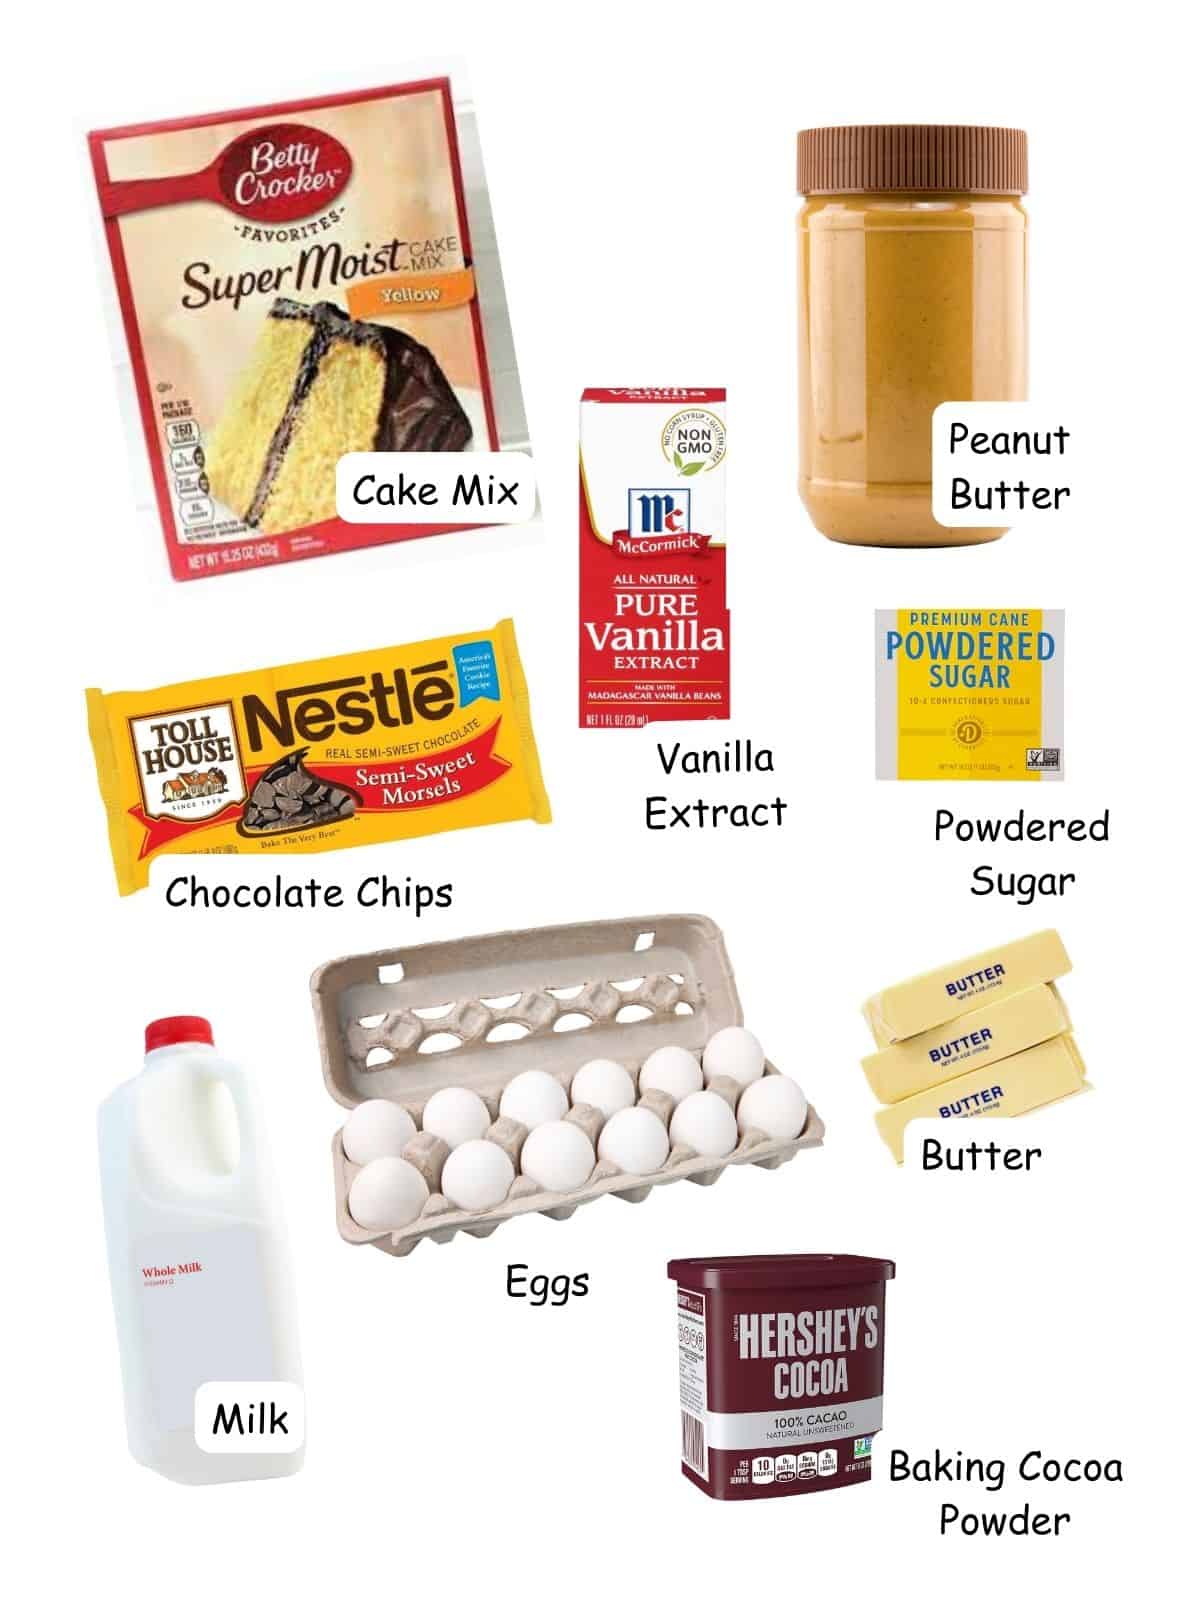 Ingredienets for peanut butter cake mix cake.